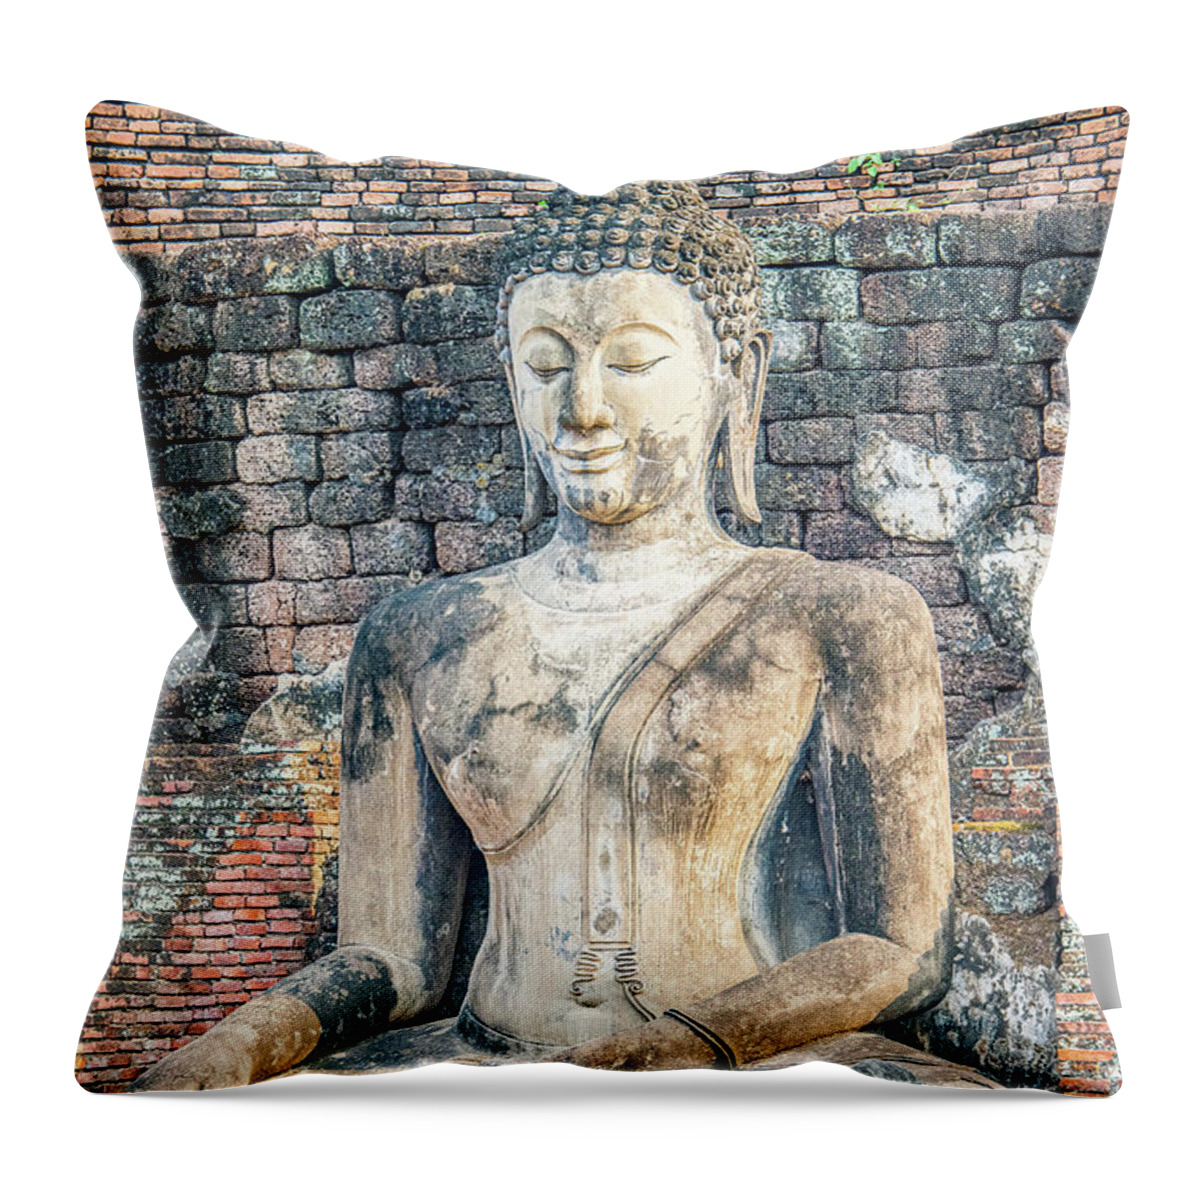 Thailand Photography Throw Pillow featuring the photograph Ancient Buddha by Marla Brown